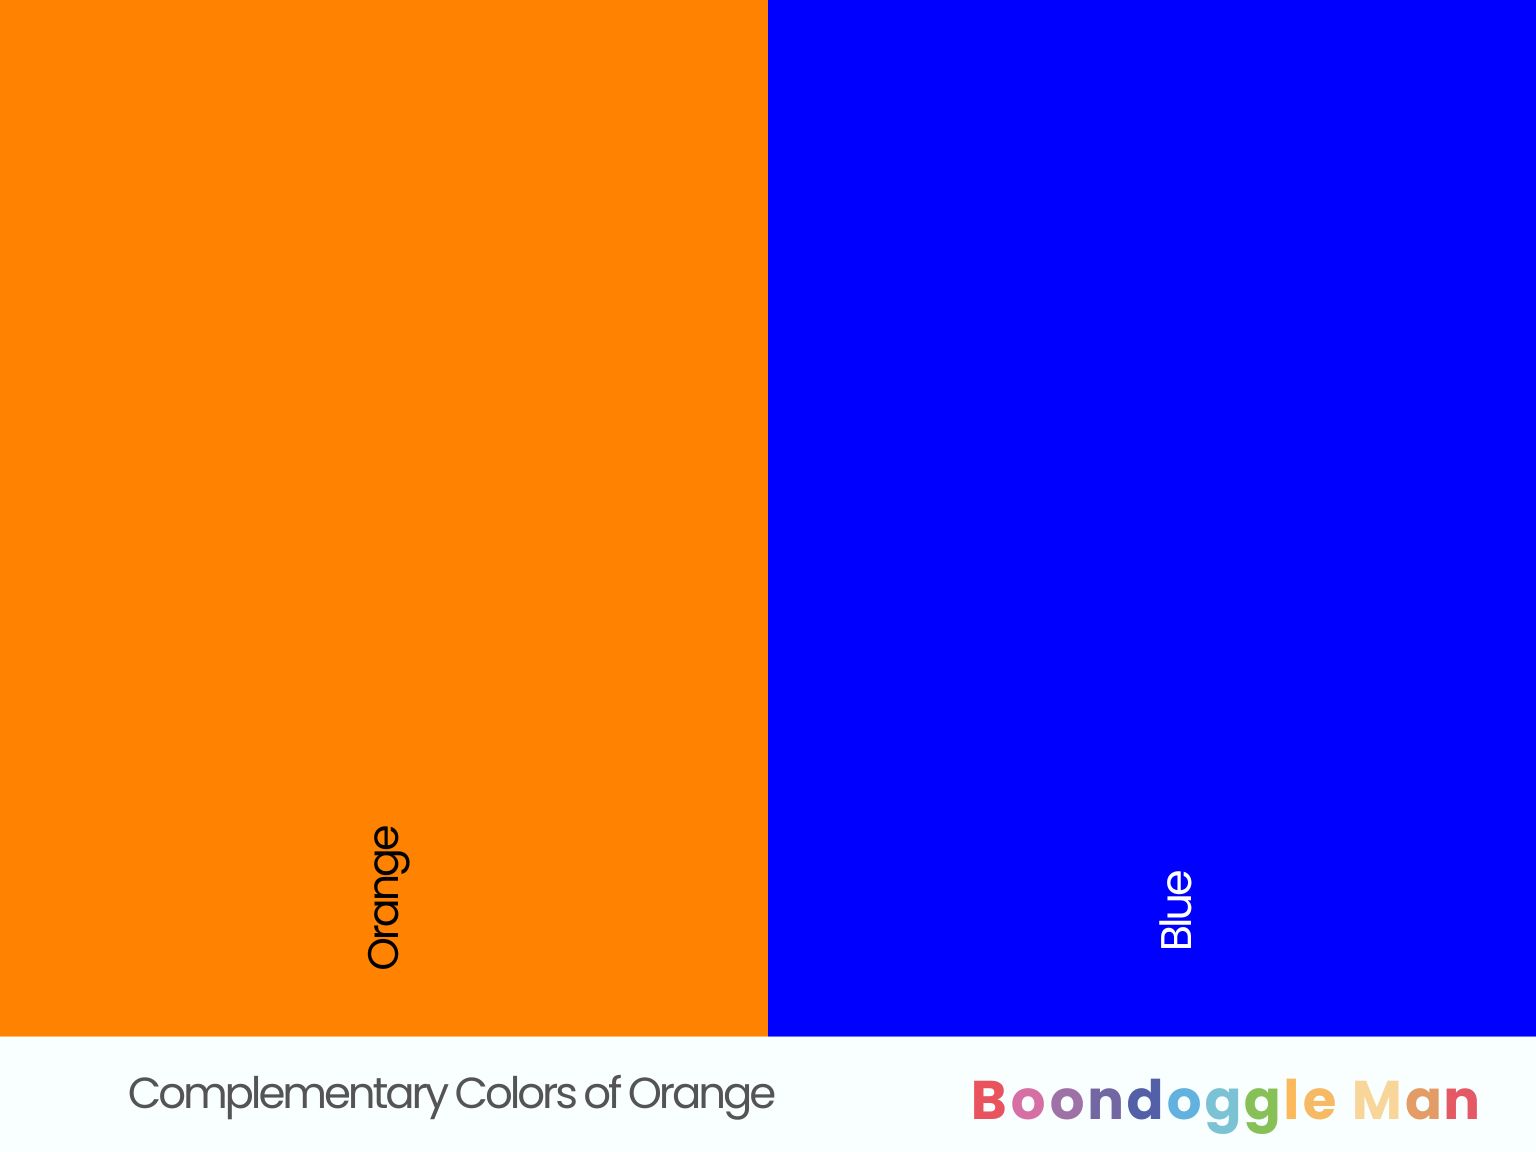 Complementary Colors of Orange